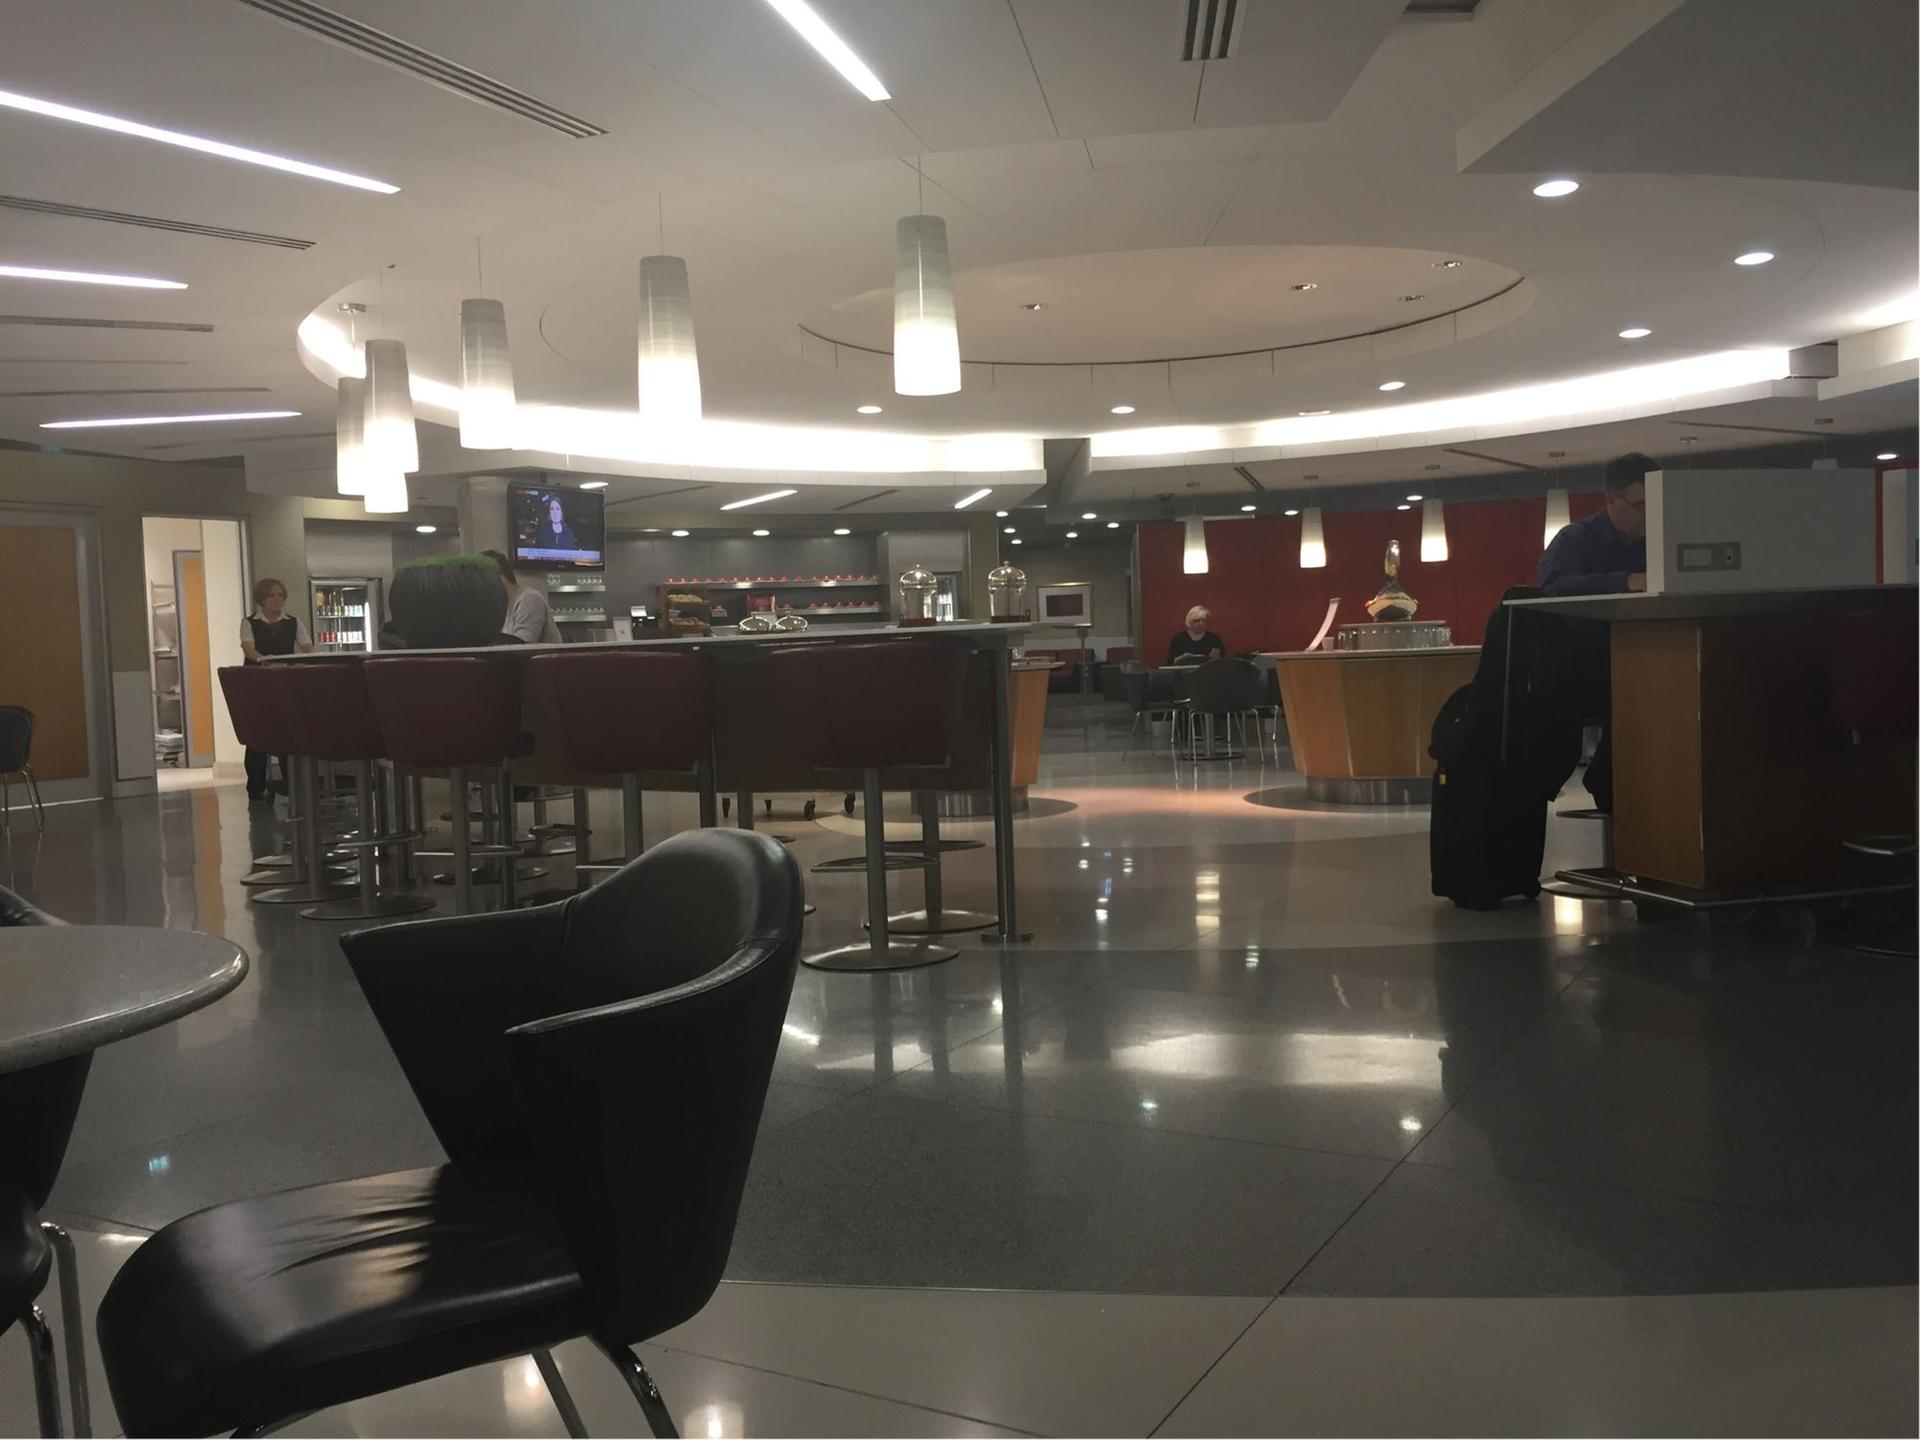 American Airlines Admirals Club image 30 of 38